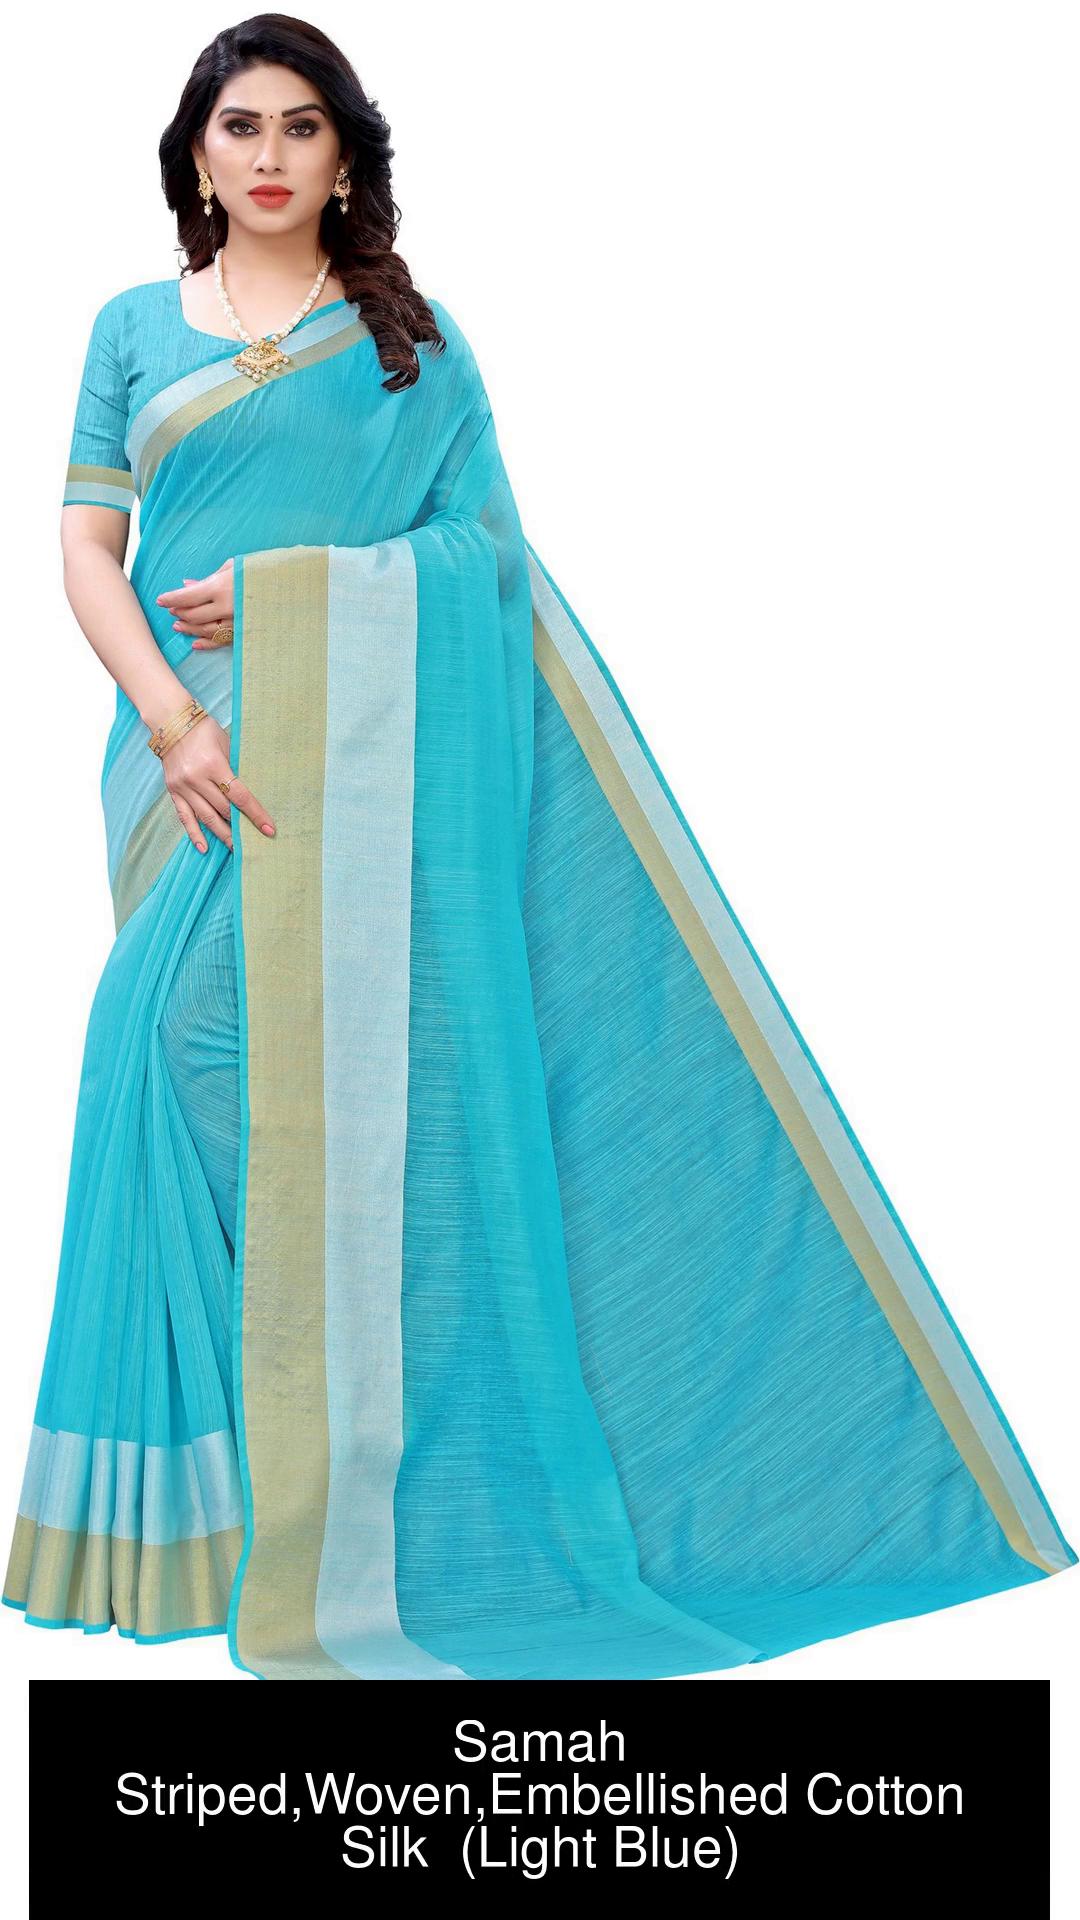  CRAZYBACHAT Women's Cotton Blended Fabric Saree